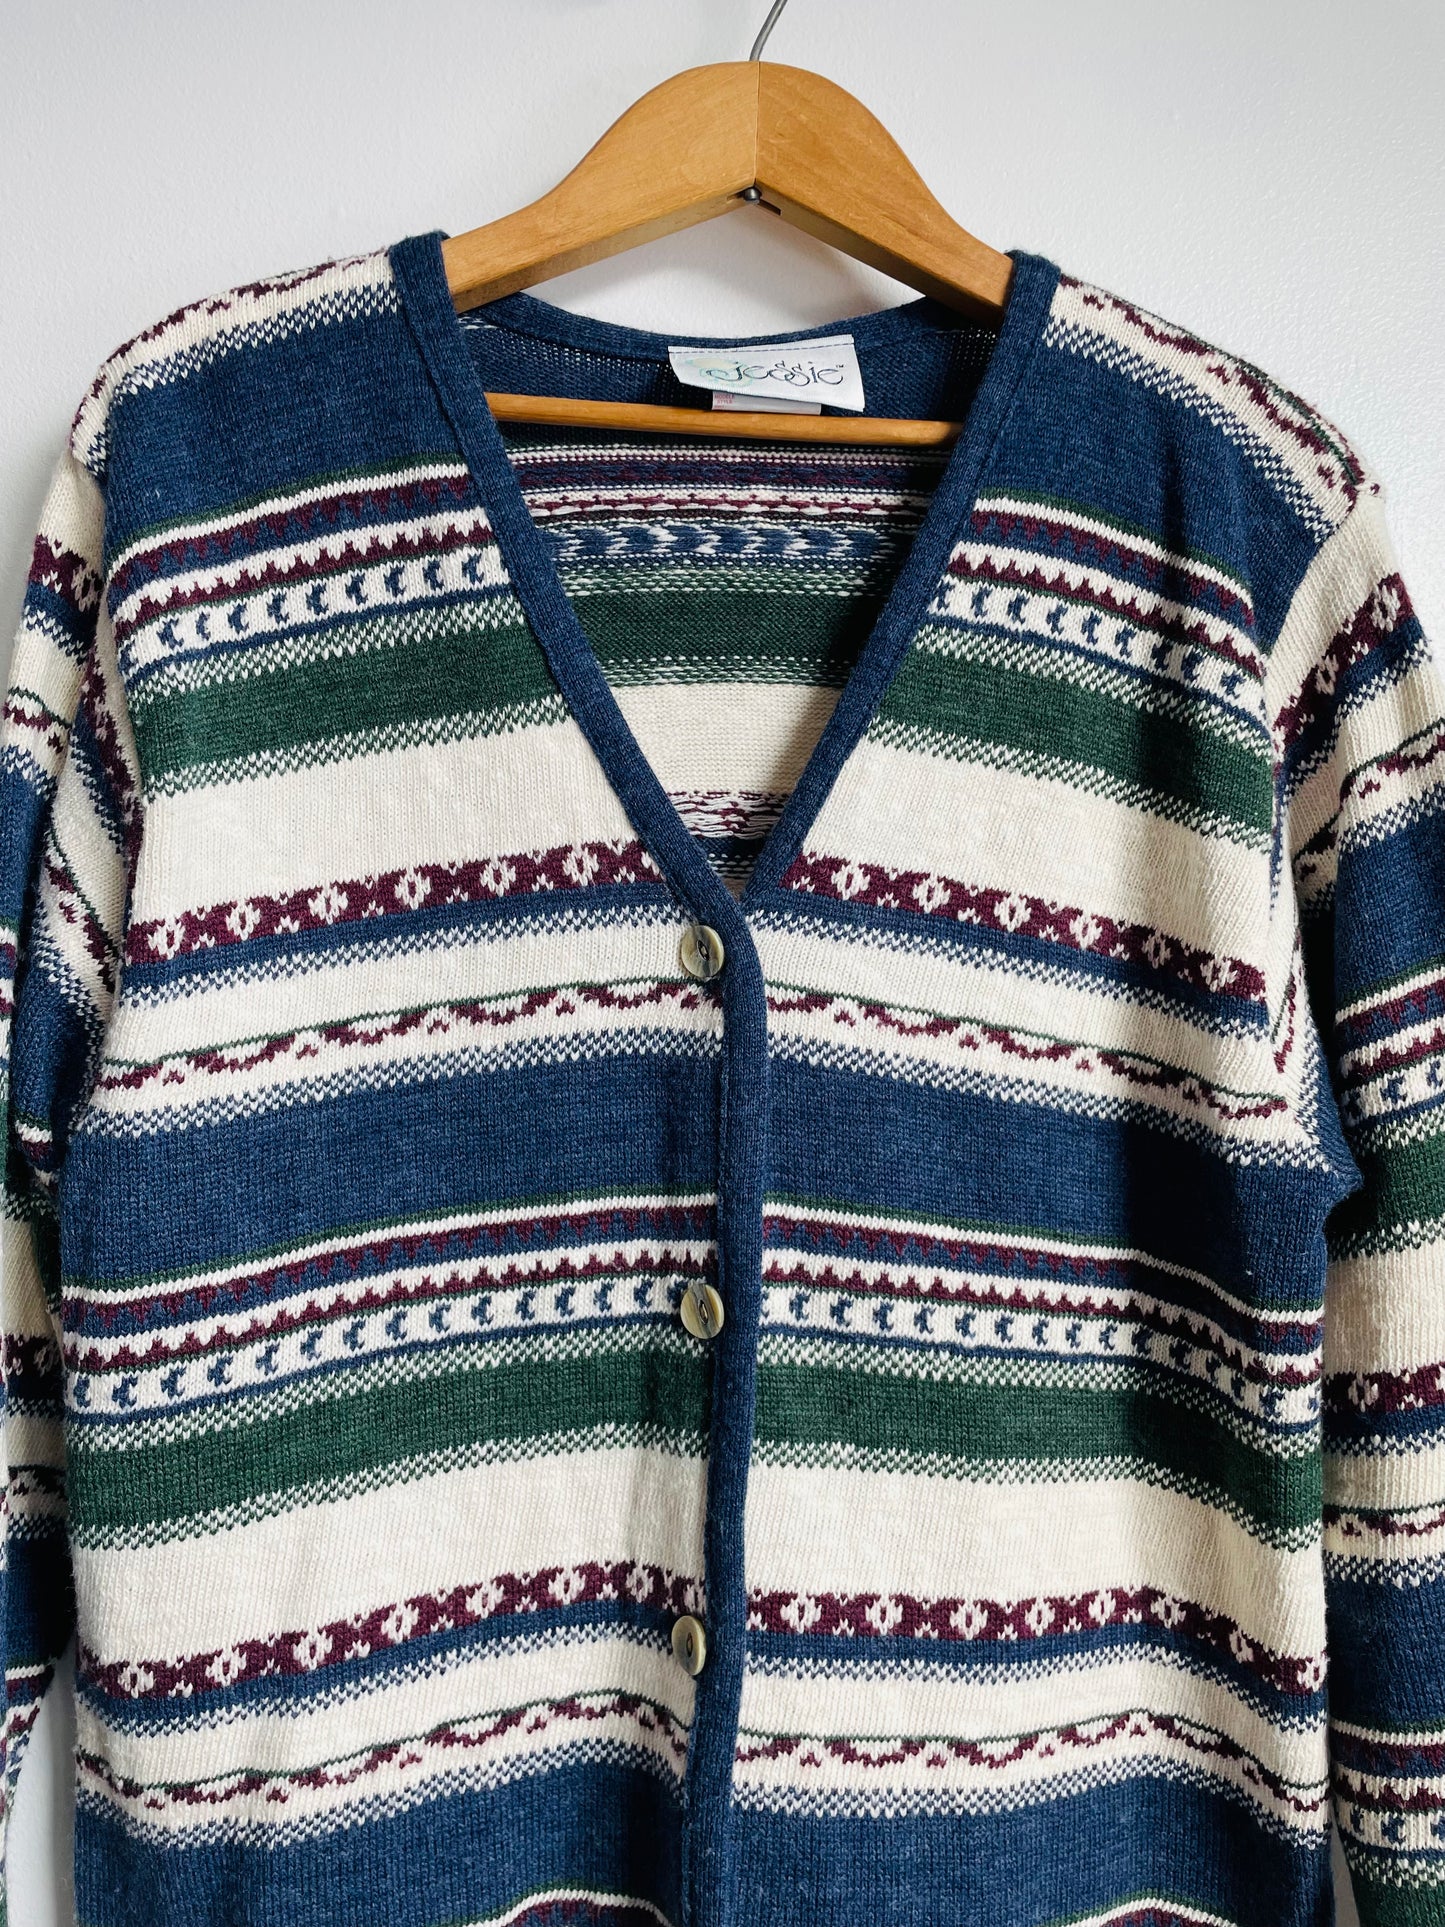 Jessie Button Up Cardigan Sweater with Blue, Maroon, Green, & Cream Pattern